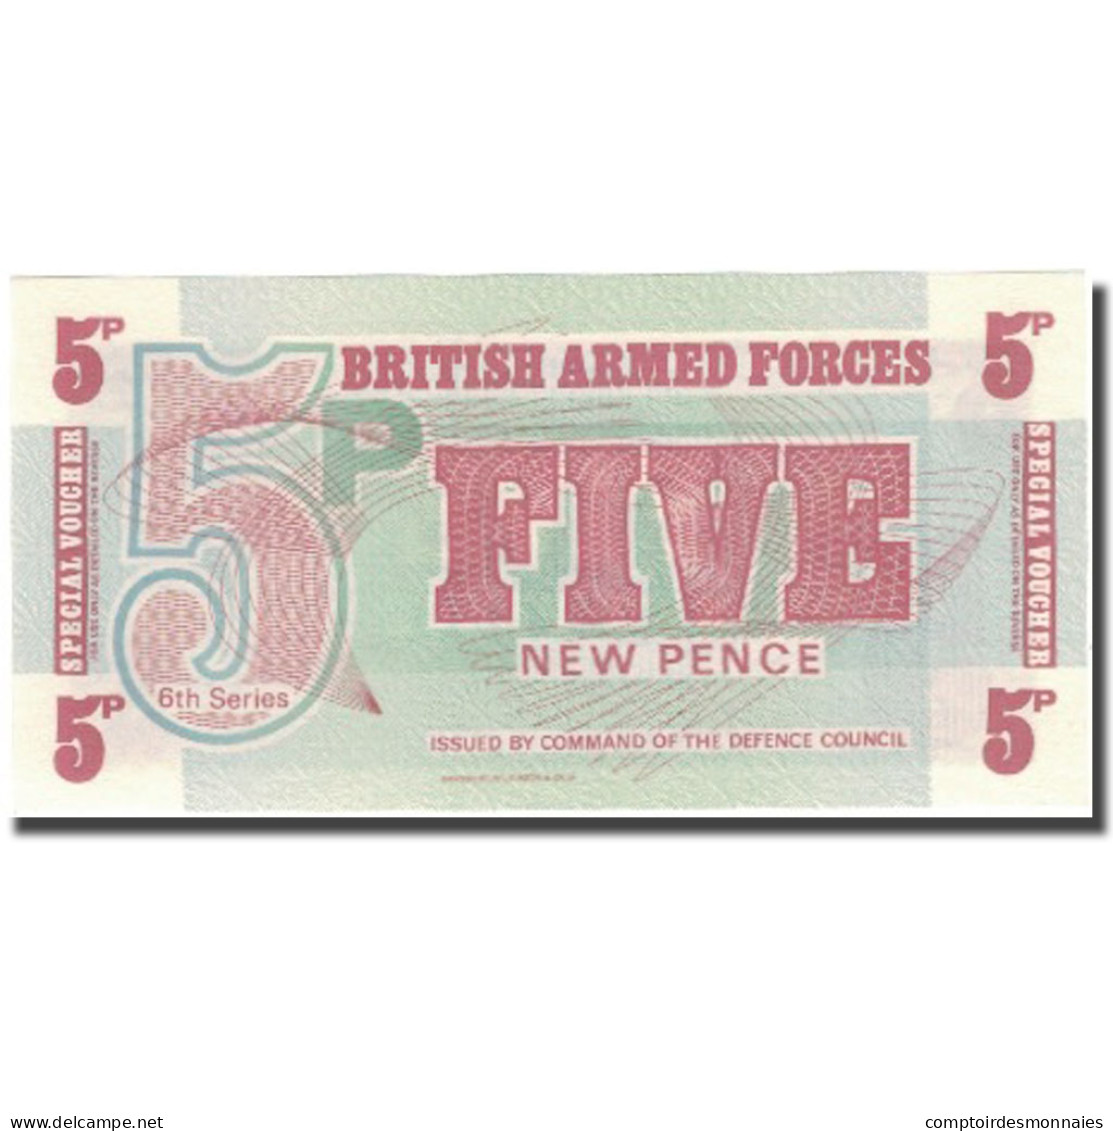 Billet, Grande-Bretagne, 5 New Pence, Undated (1972), KM:M44a, NEUF - British Armed Forces & Special Vouchers